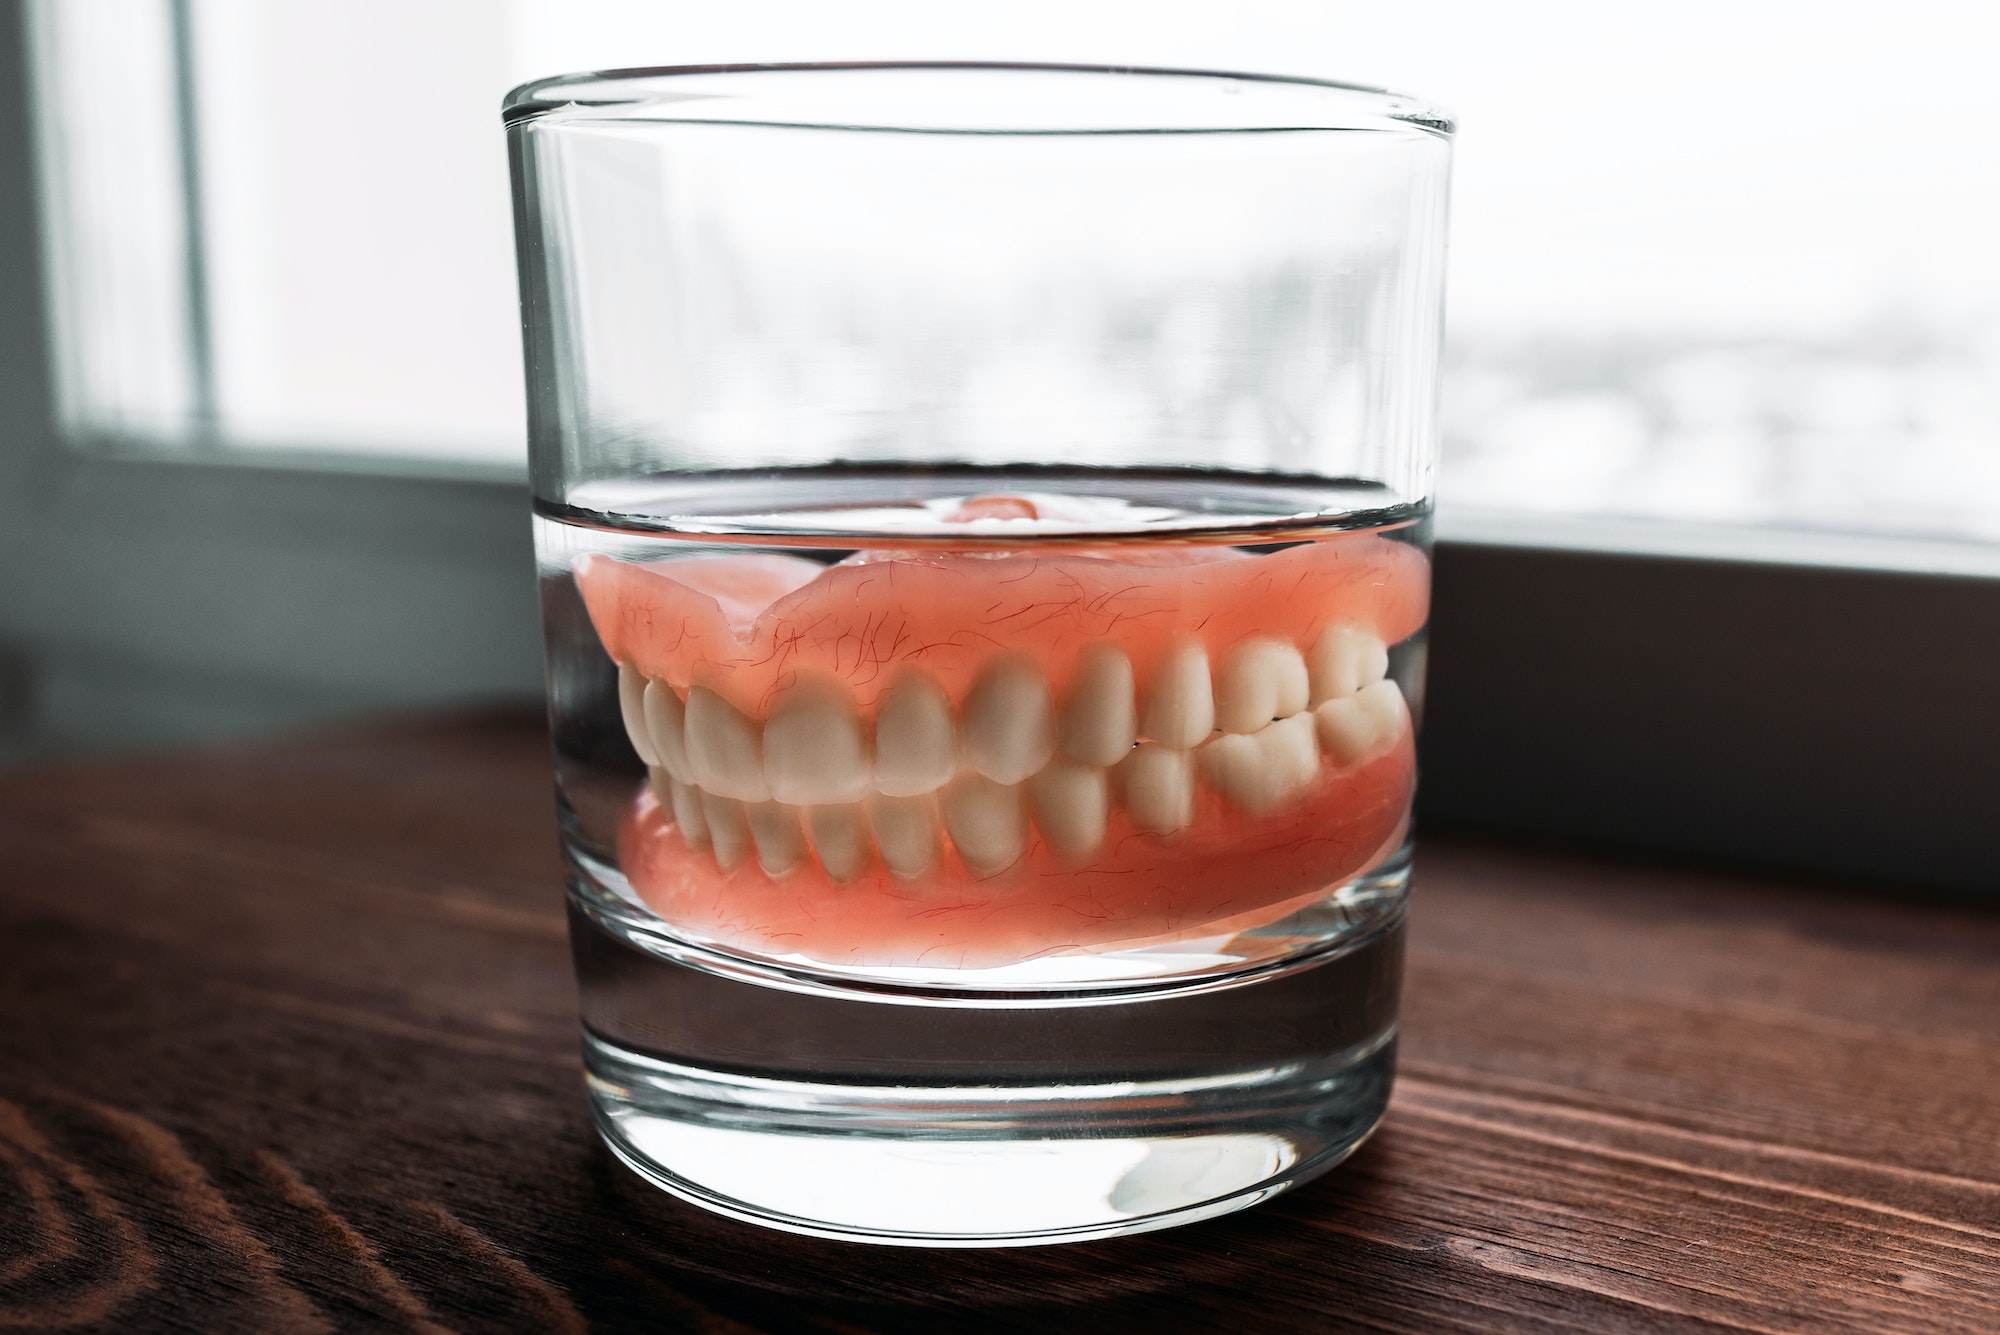 A denture in a glass of water. Dental prosthesis care. Full removable plastic denture of the jaws